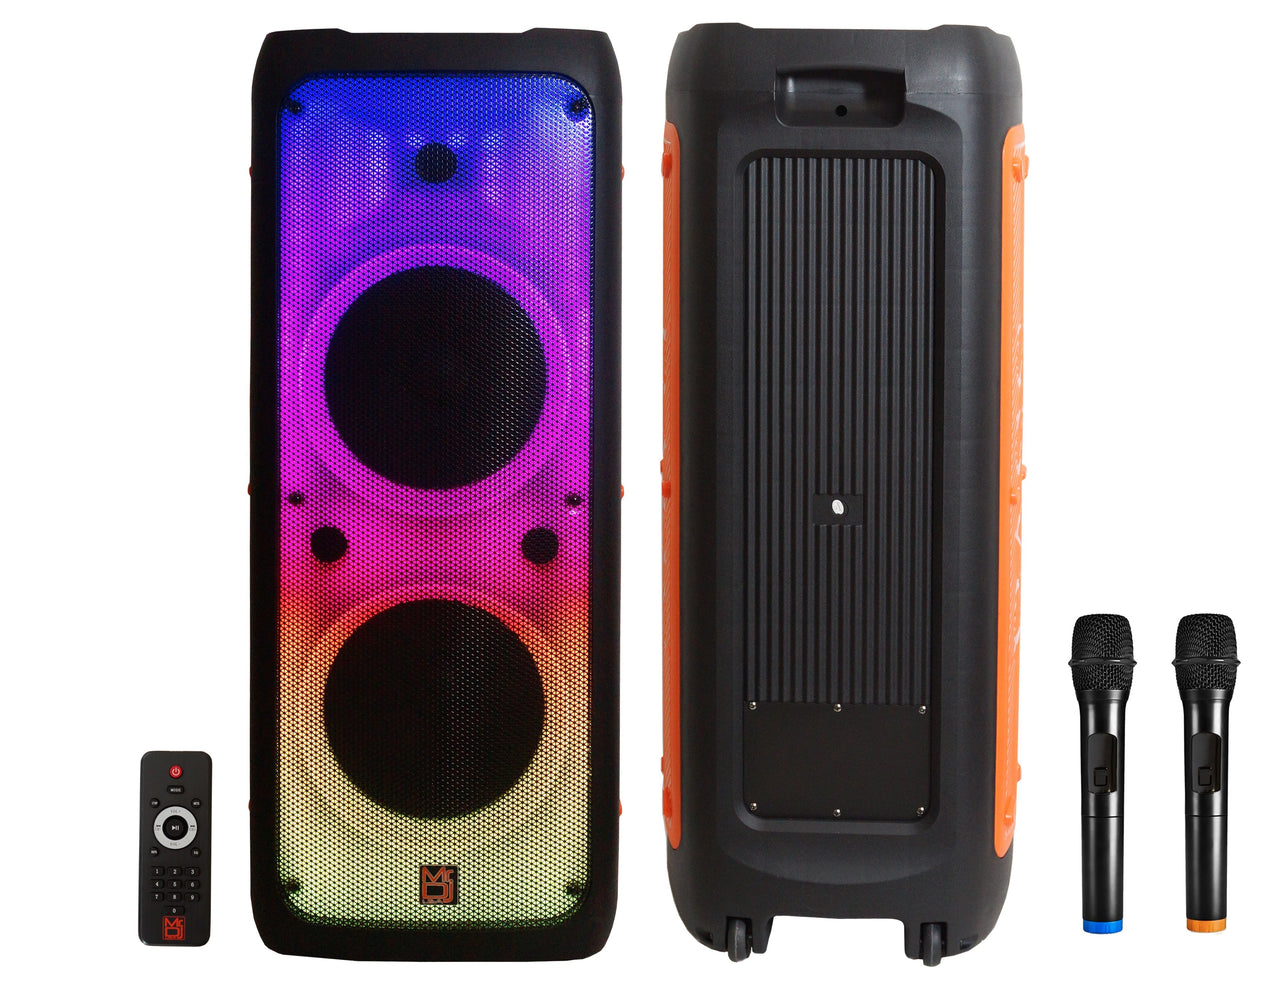 MR DJ FLAME5500LED DUAL 12” TWS Colorful Flame Lighting Rechargeable Bluetooth Speaker 5500 Watts